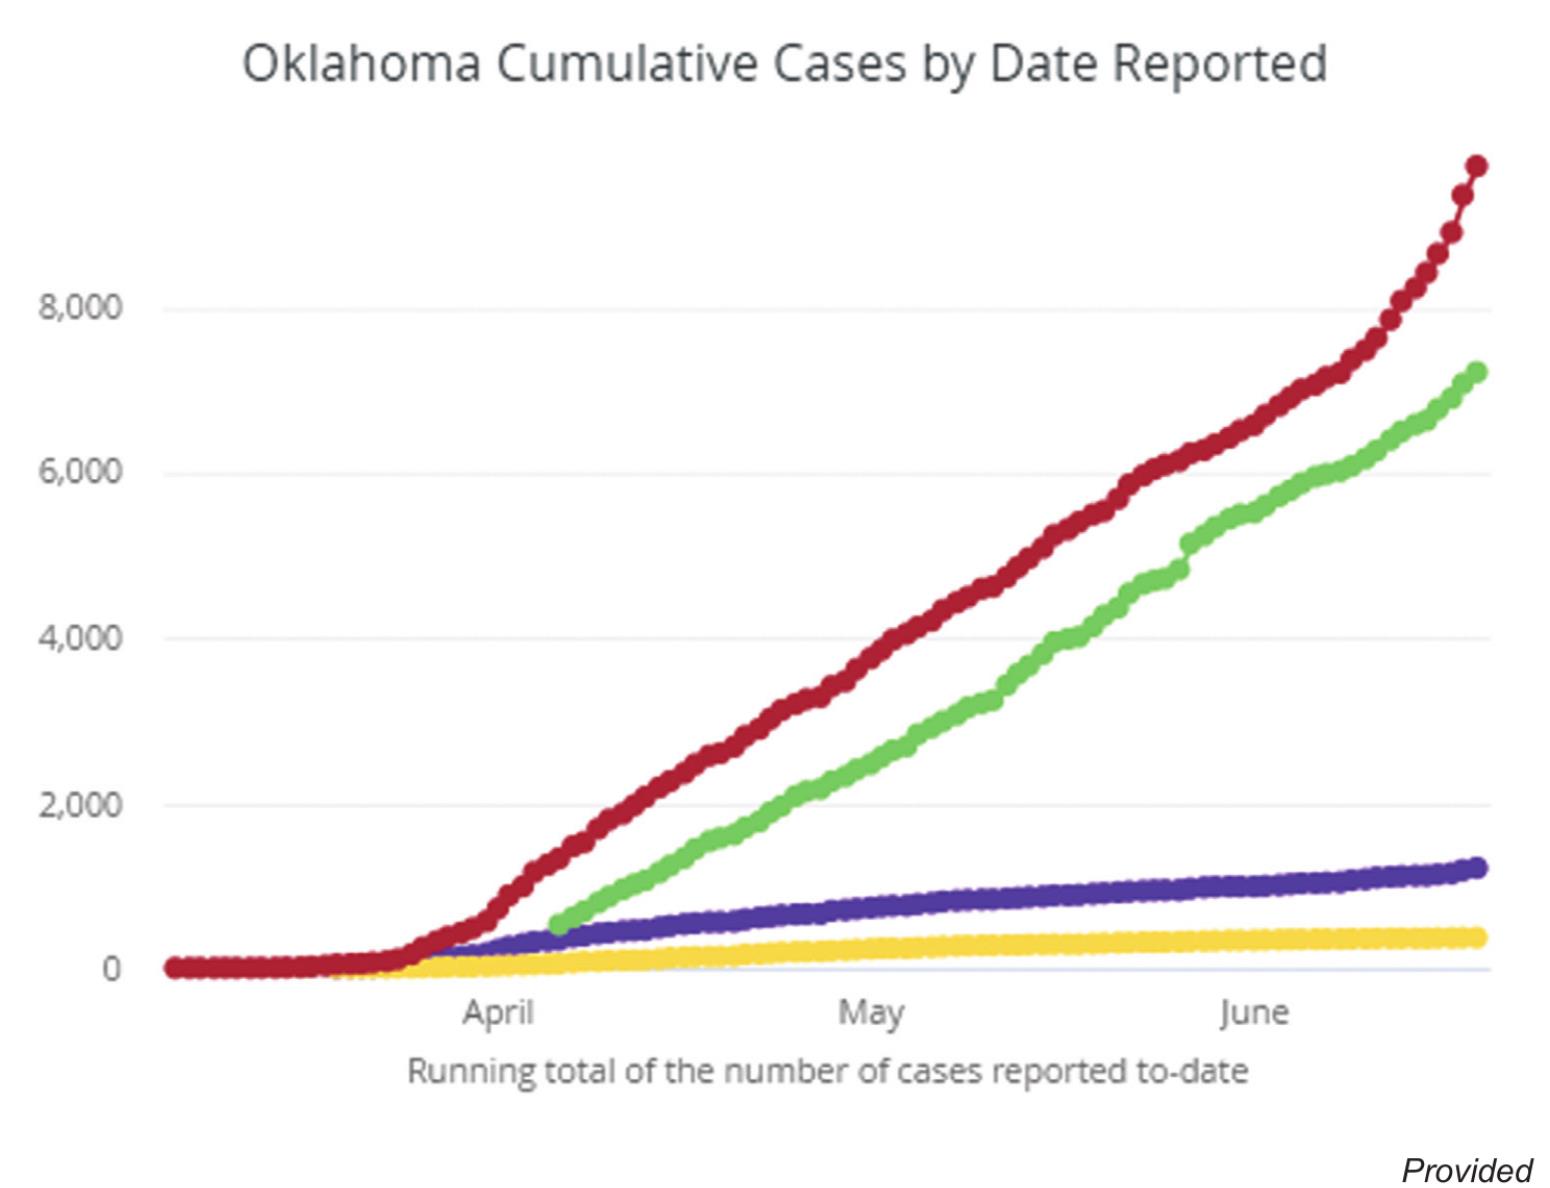 This chart shows how the total number of COVID-19 cases has changed since March 7, when the first case was reported by the Oklahoma State Department of Health.